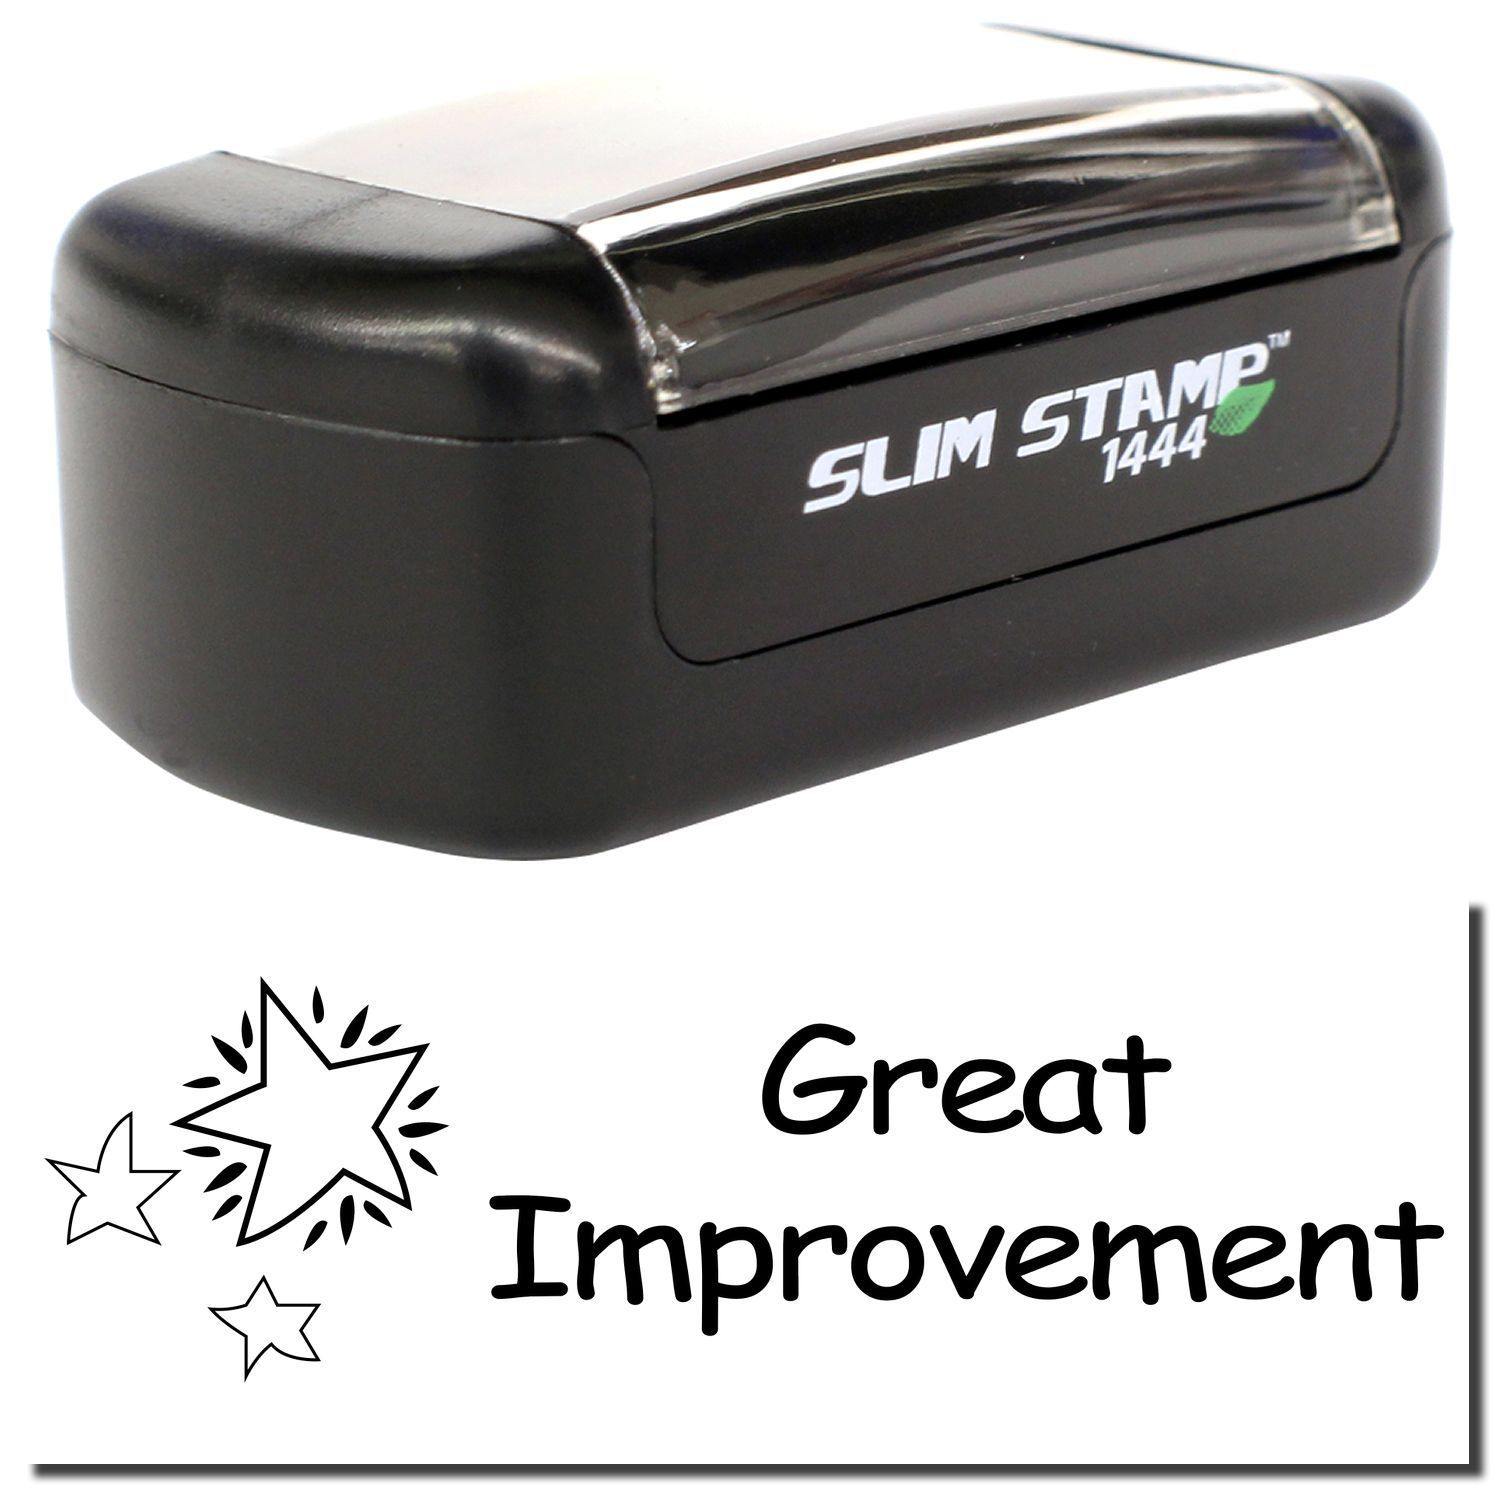 A stock office pre-inked stamp with a stamped image showing how the text "Great Improvement" in a whimsical font with a trio of stars on the left side is displayed after stamping.